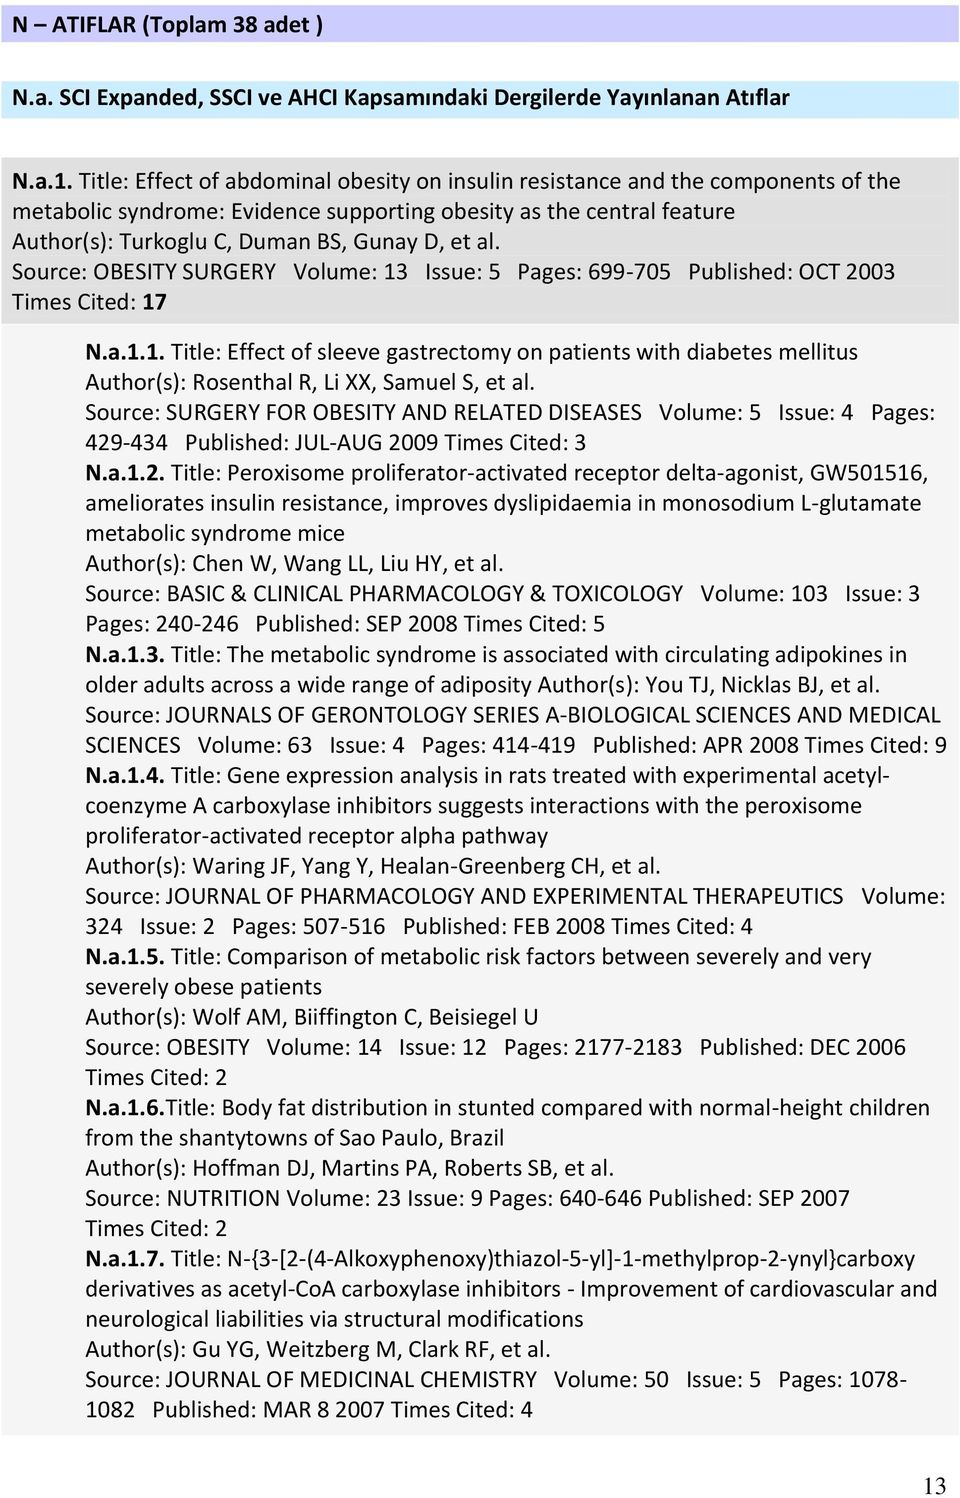 al. Source: OBESITY SURGERY Volume: 13 Issue: 5 Pages: 699-705 Published: OCT 2003 Times Cited: 17 N.a.1.1. Title: Effect of sleeve gastrectomy on patients with diabetes mellitus Author(s): Rosenthal R, Li XX, Samuel S, et al.